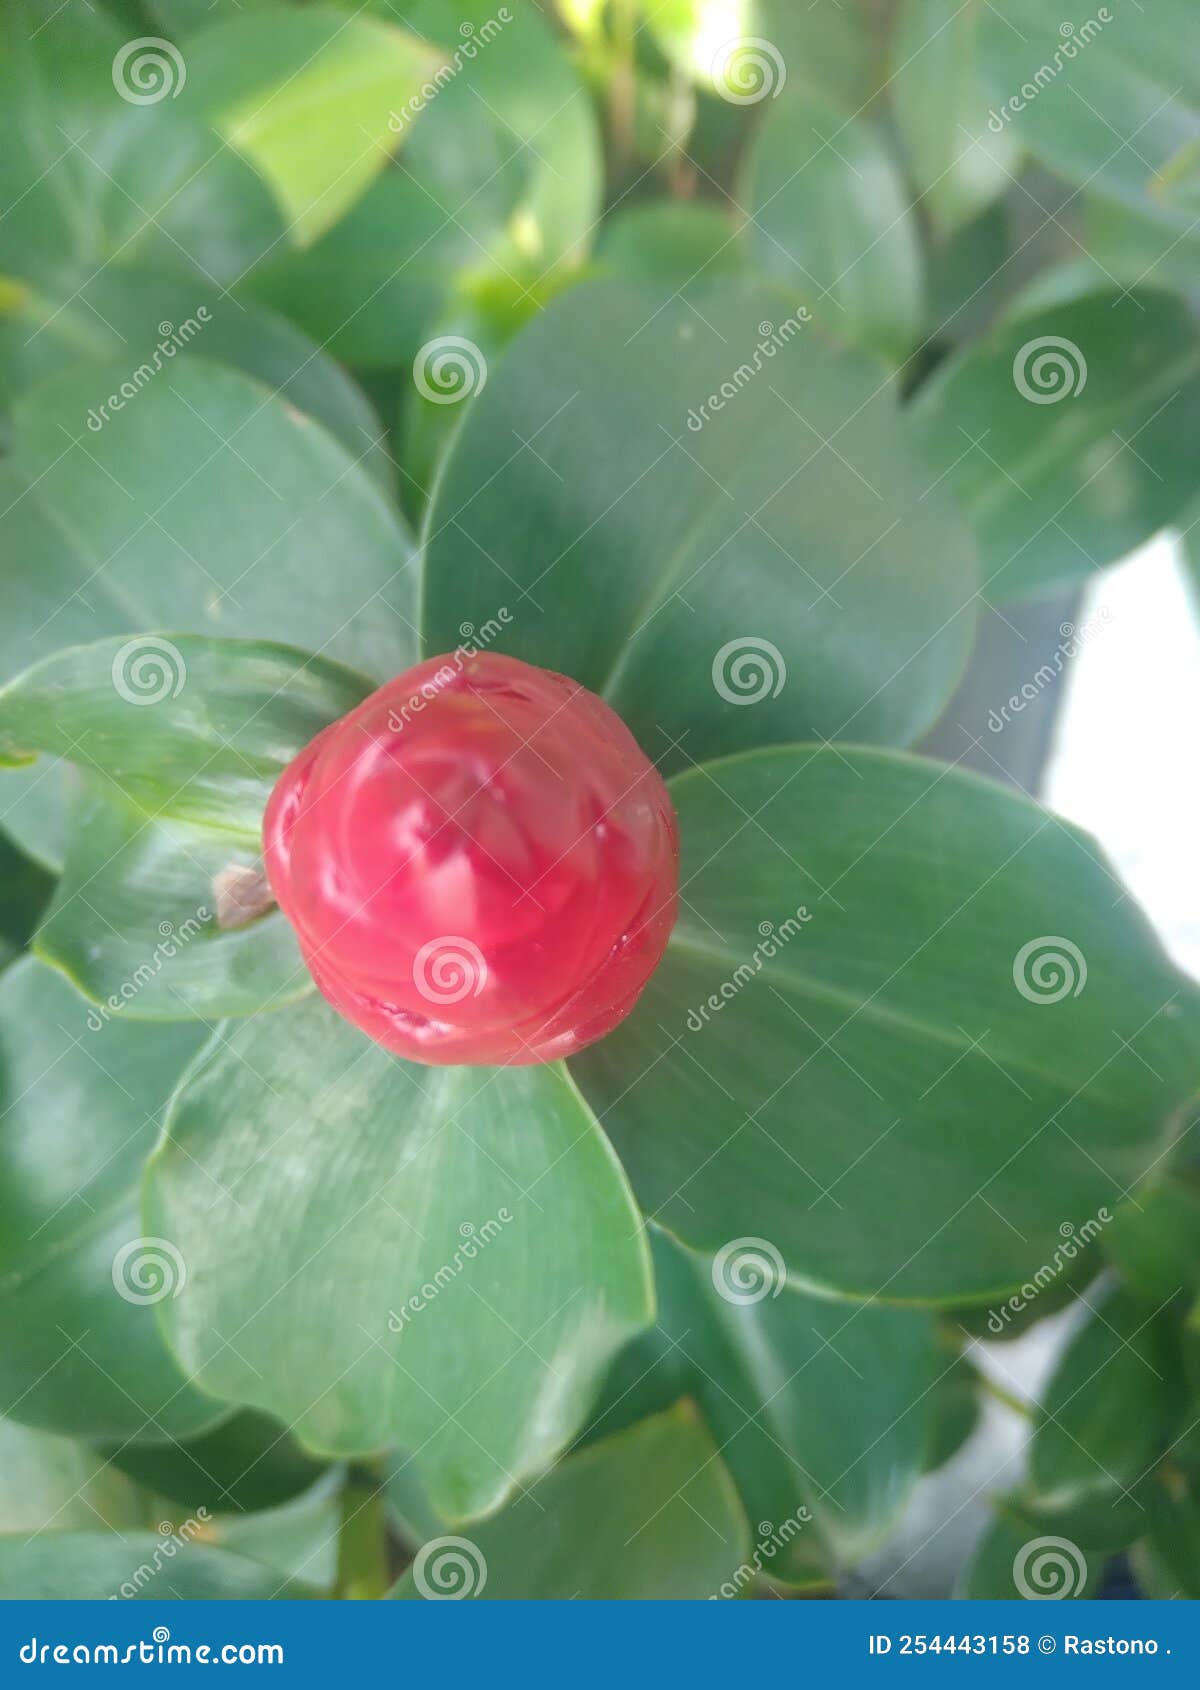 pictures of red flowers with green leavesÃ¯Â¿Â¼